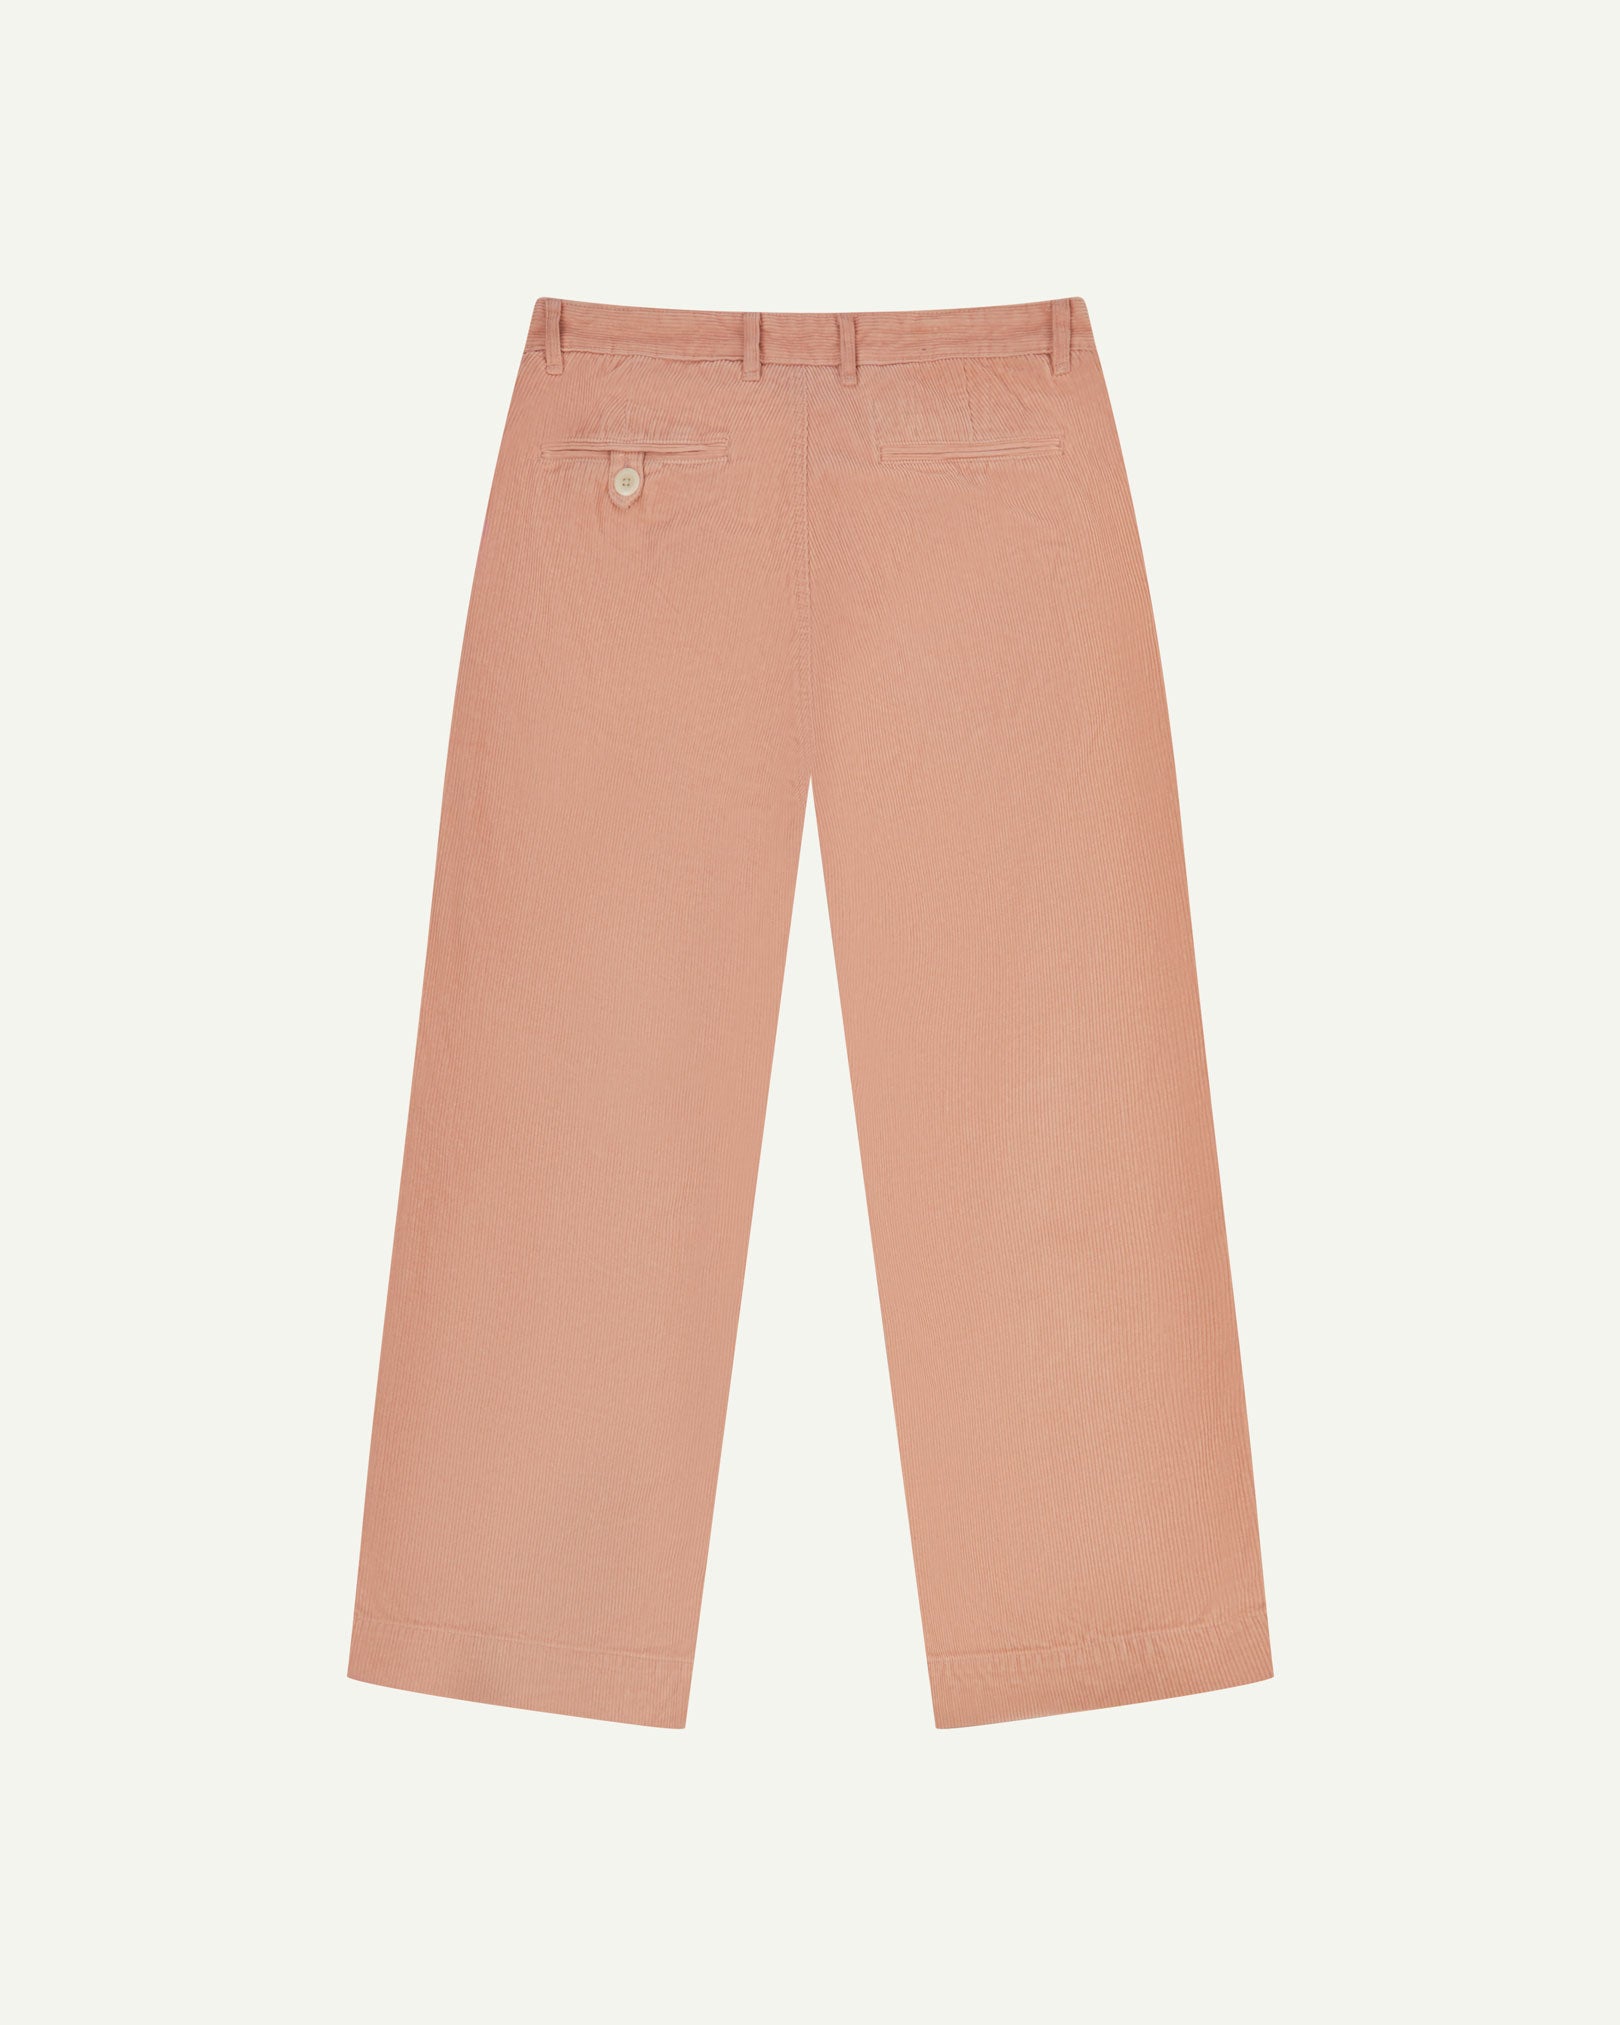 Back flat view of Uskees 5018 cord boat pants in dusty pink showing belt loops, back pockets and simple, vintage silhouette.